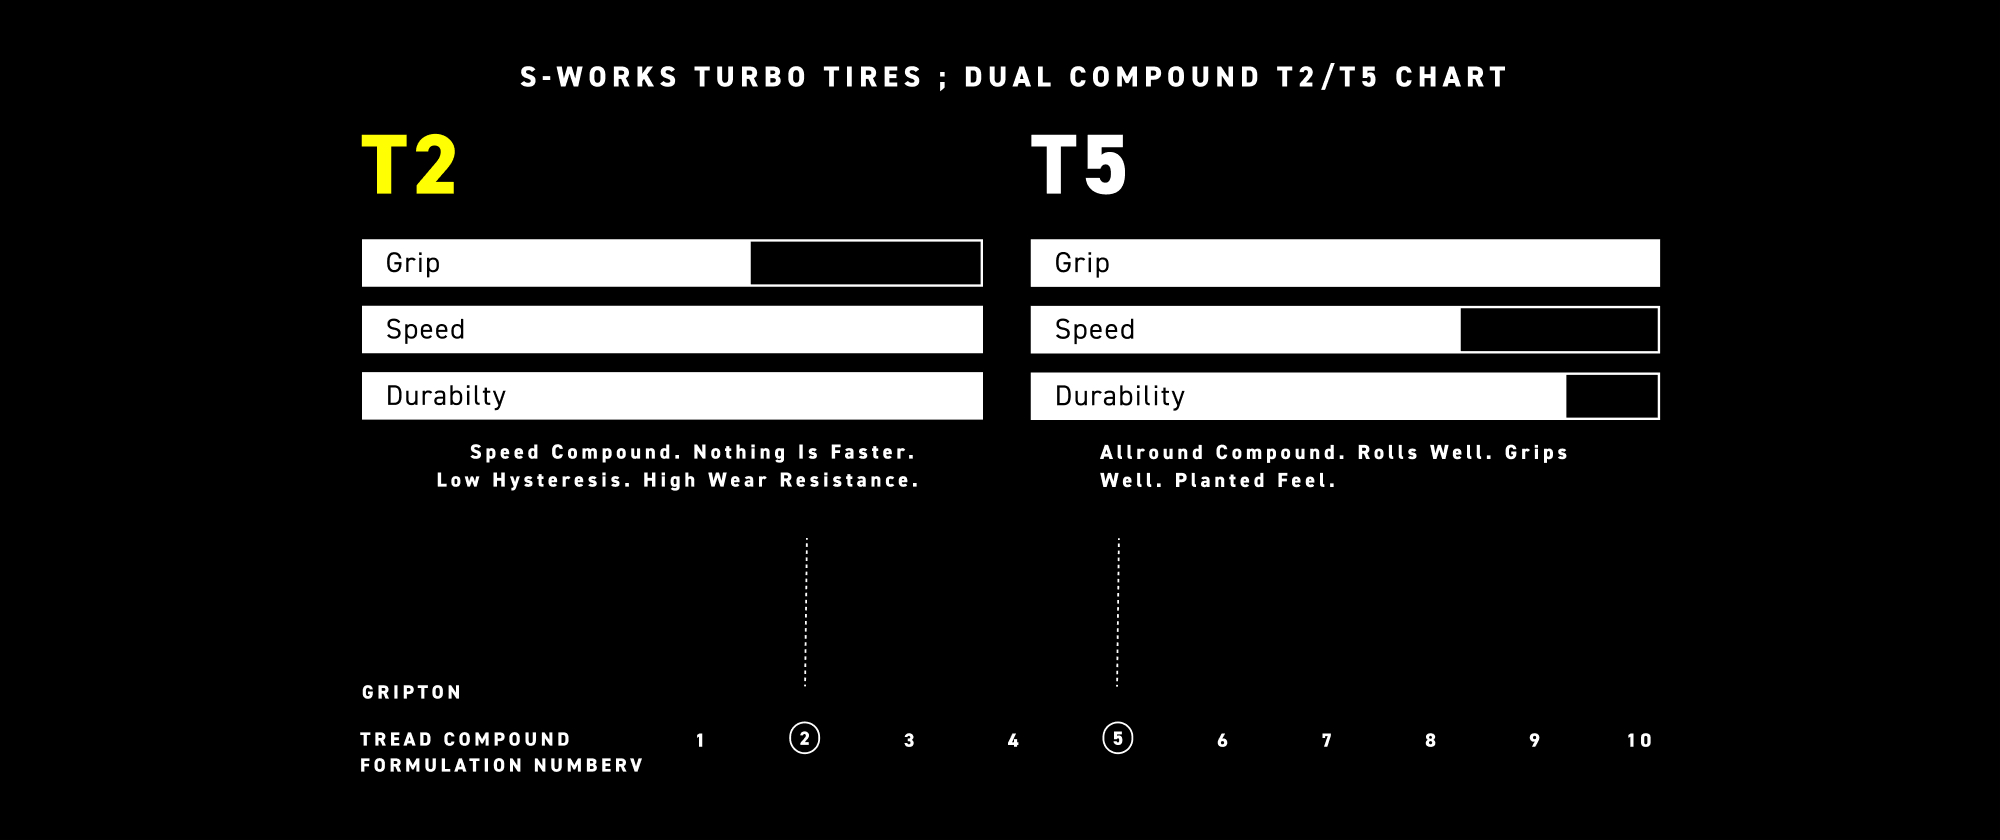 Bar graph of T2 and T5 compounds in S-Works turbo tire